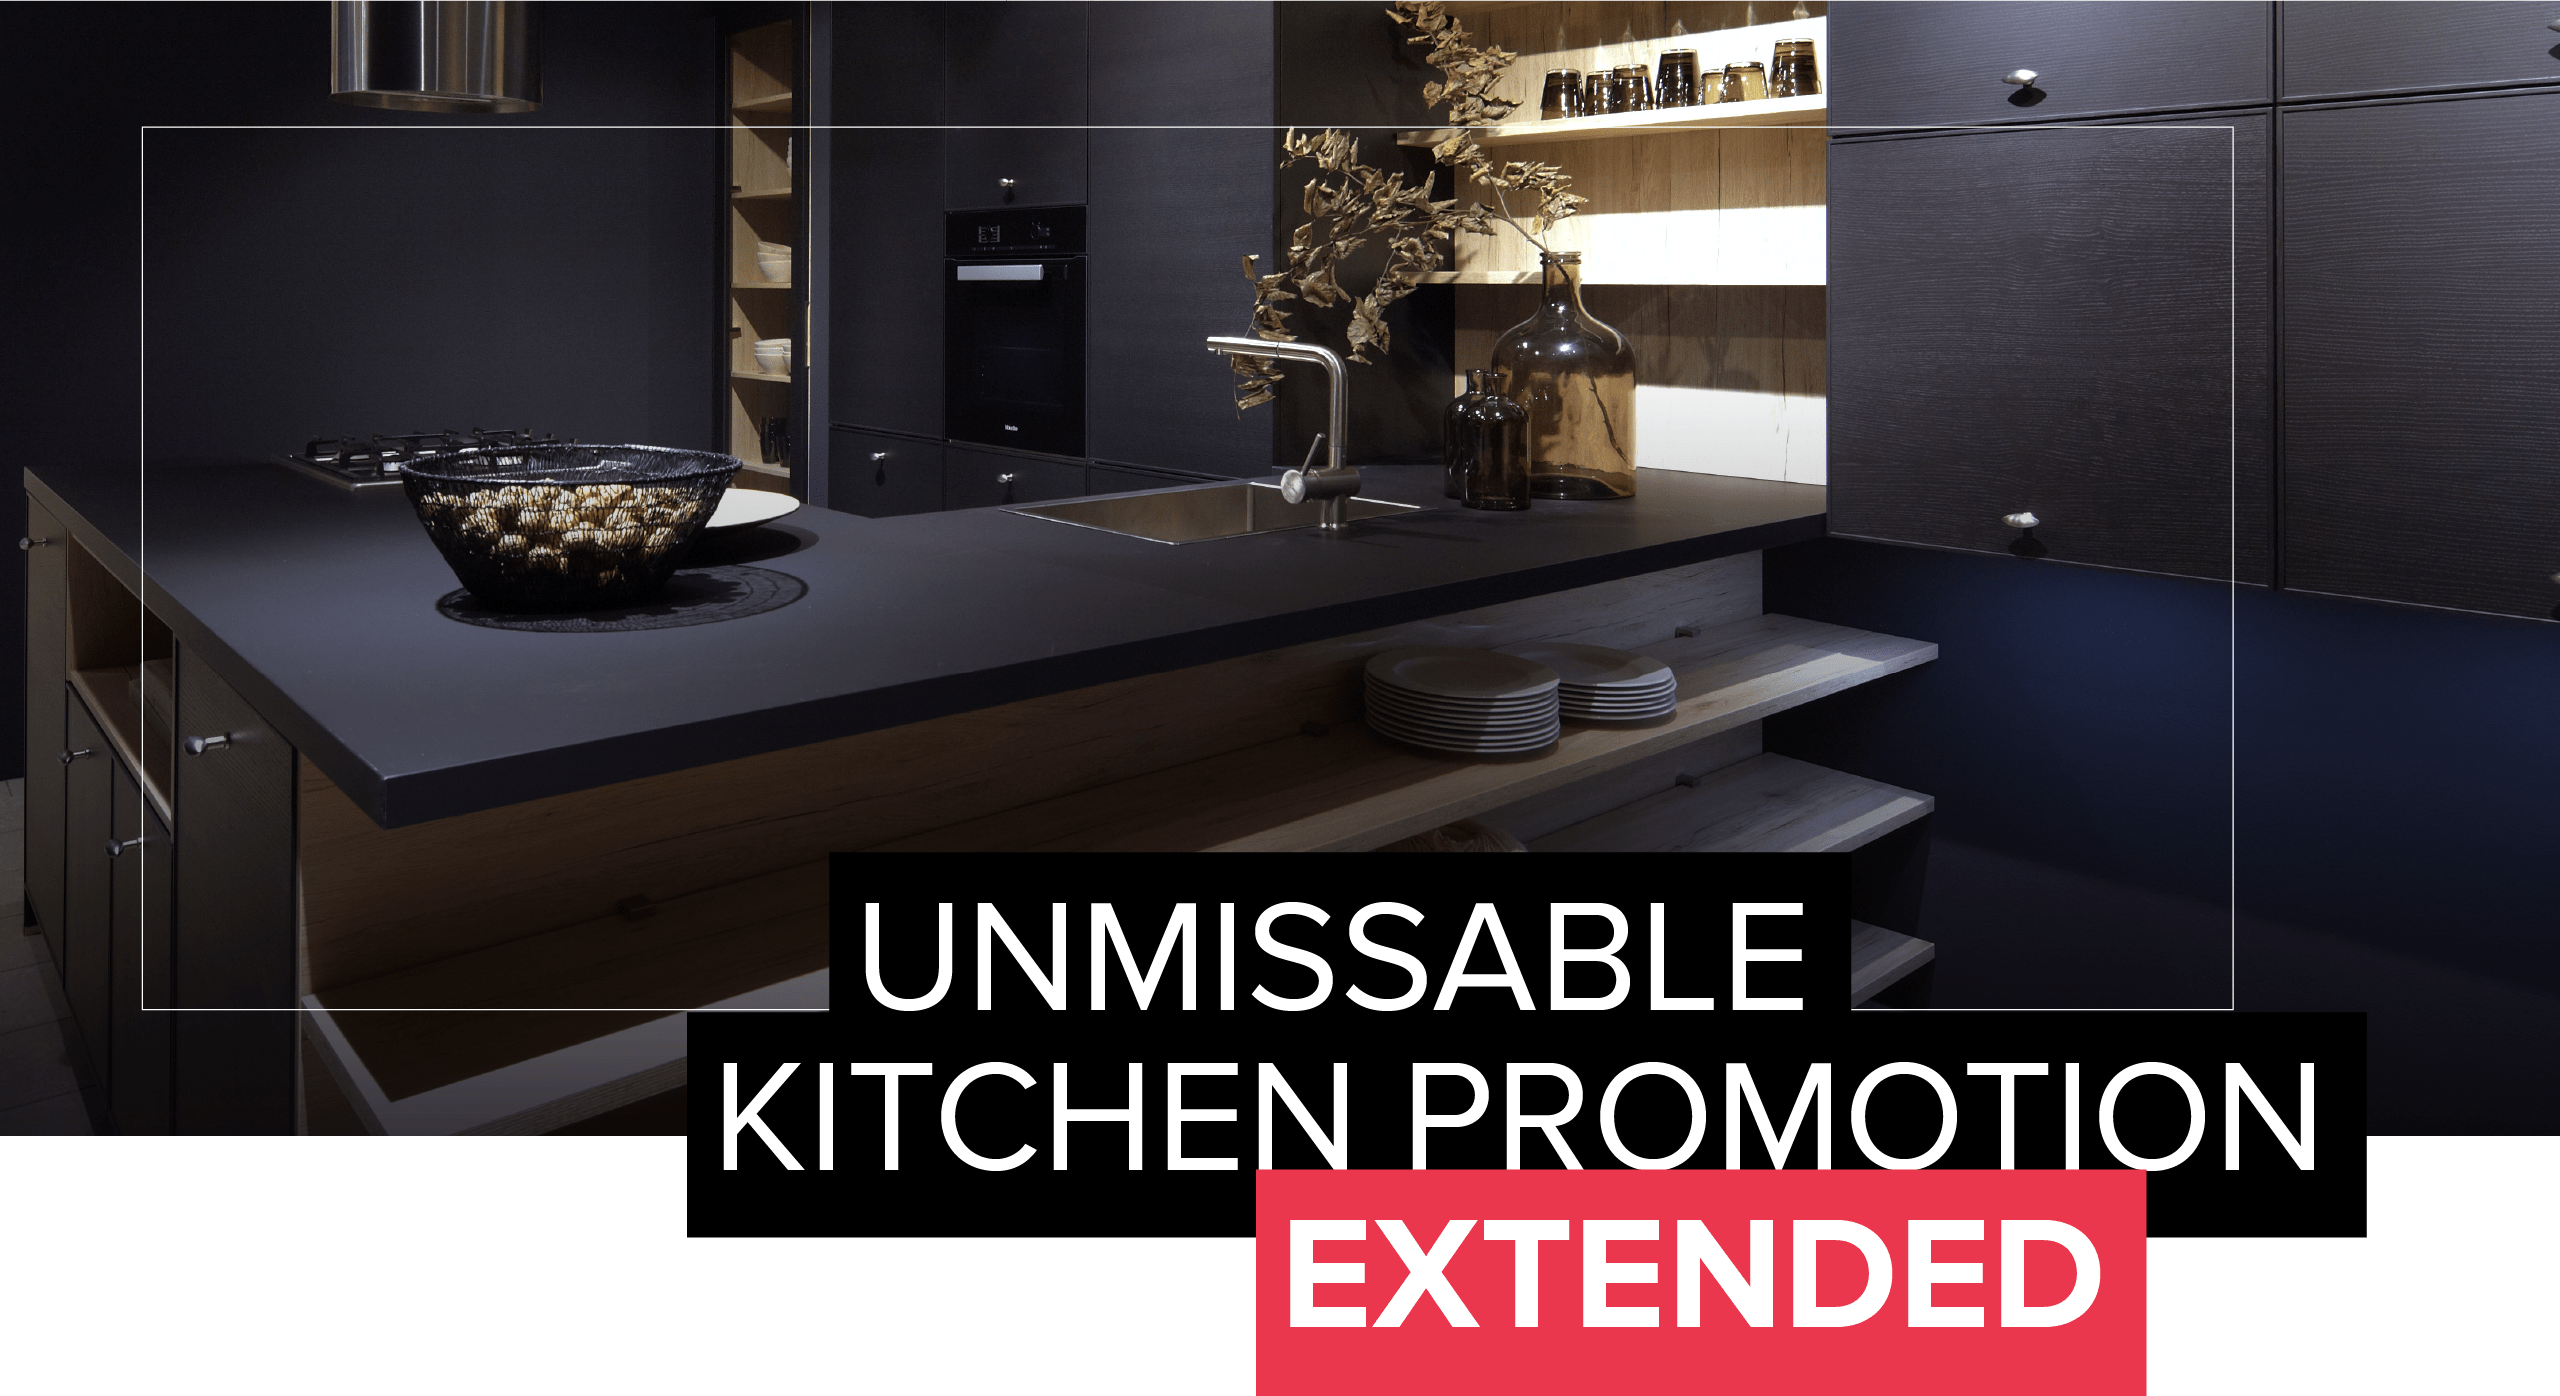 Unmissable Kitchen Promotion Extended